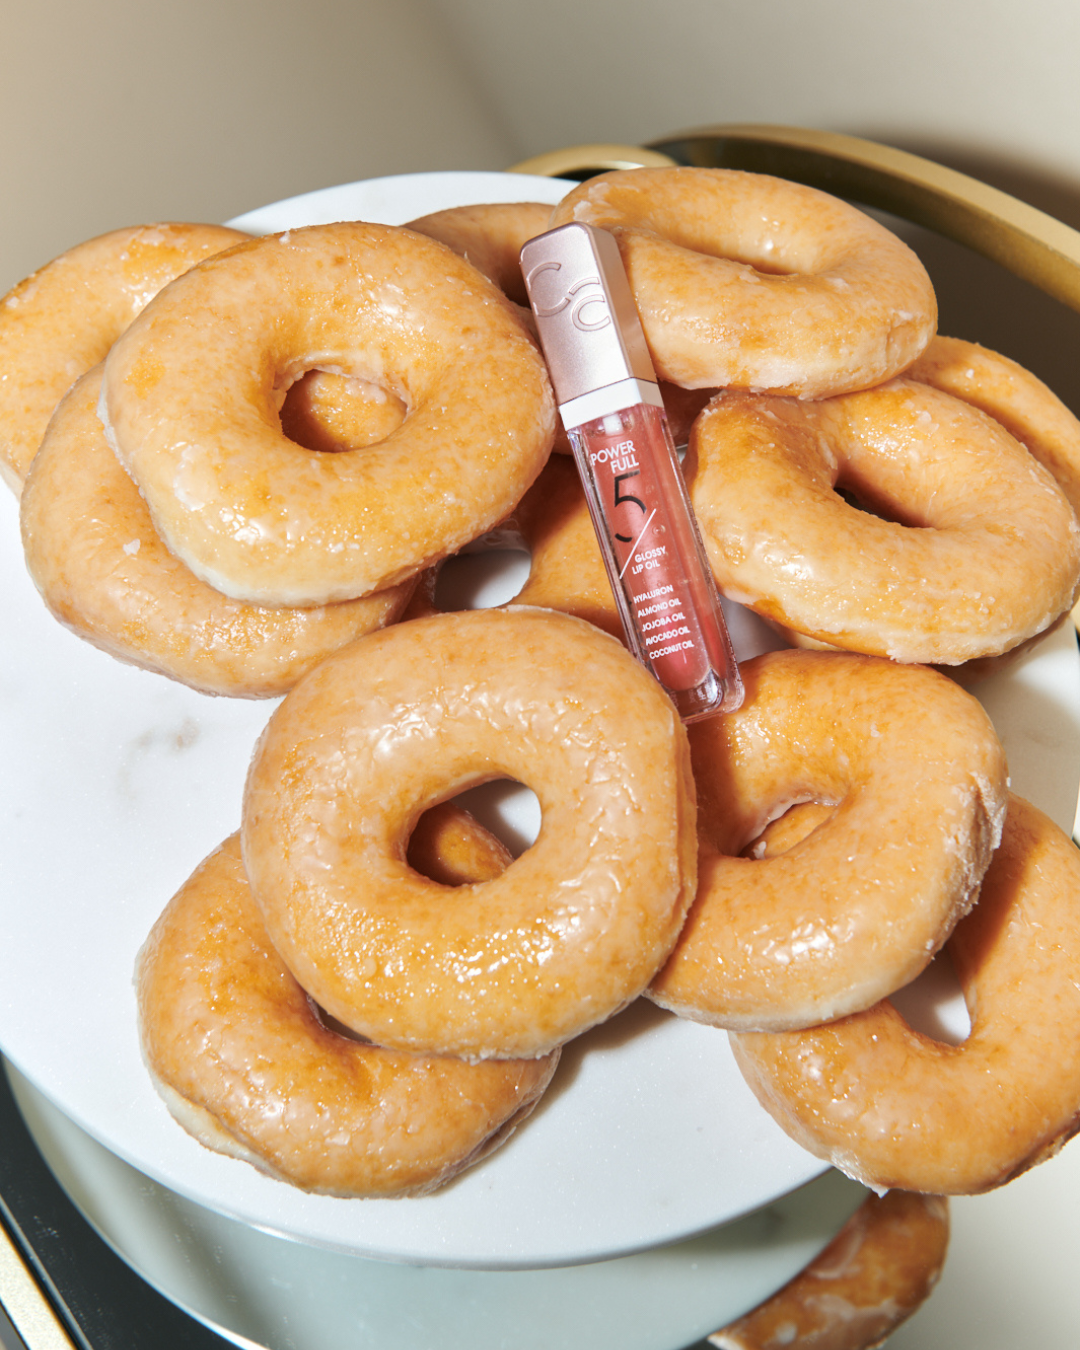 lip gloss on a pile of glazed ring donuts, glazed donut skin, glazed donuts, beauty, beauty trend, the suite, the suite edit, brutal fruit